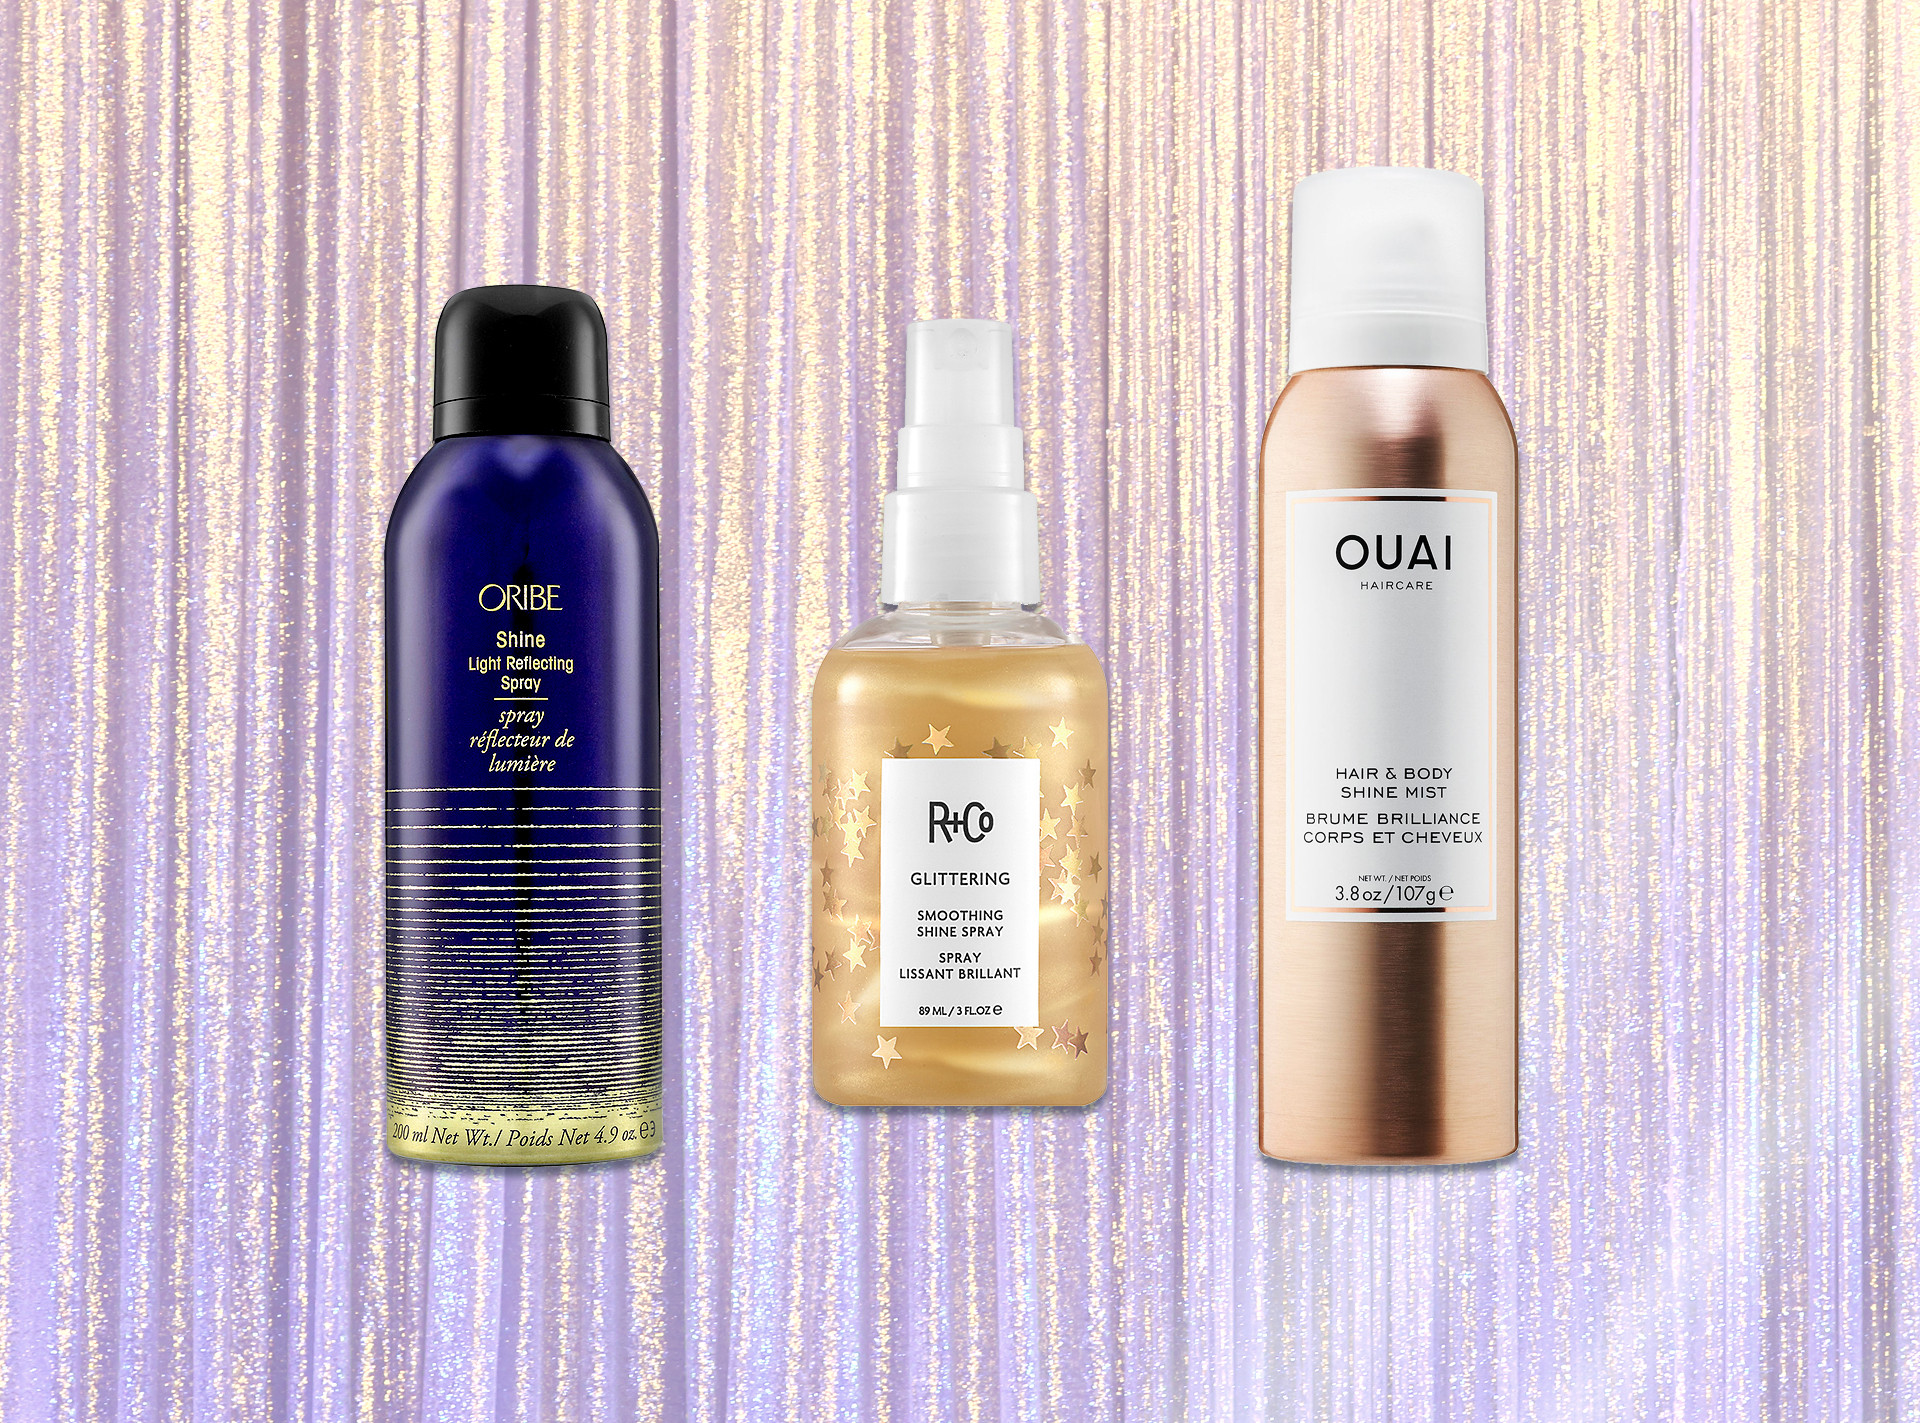 E-Comm, Top Shiny Hair Products-Ranked 